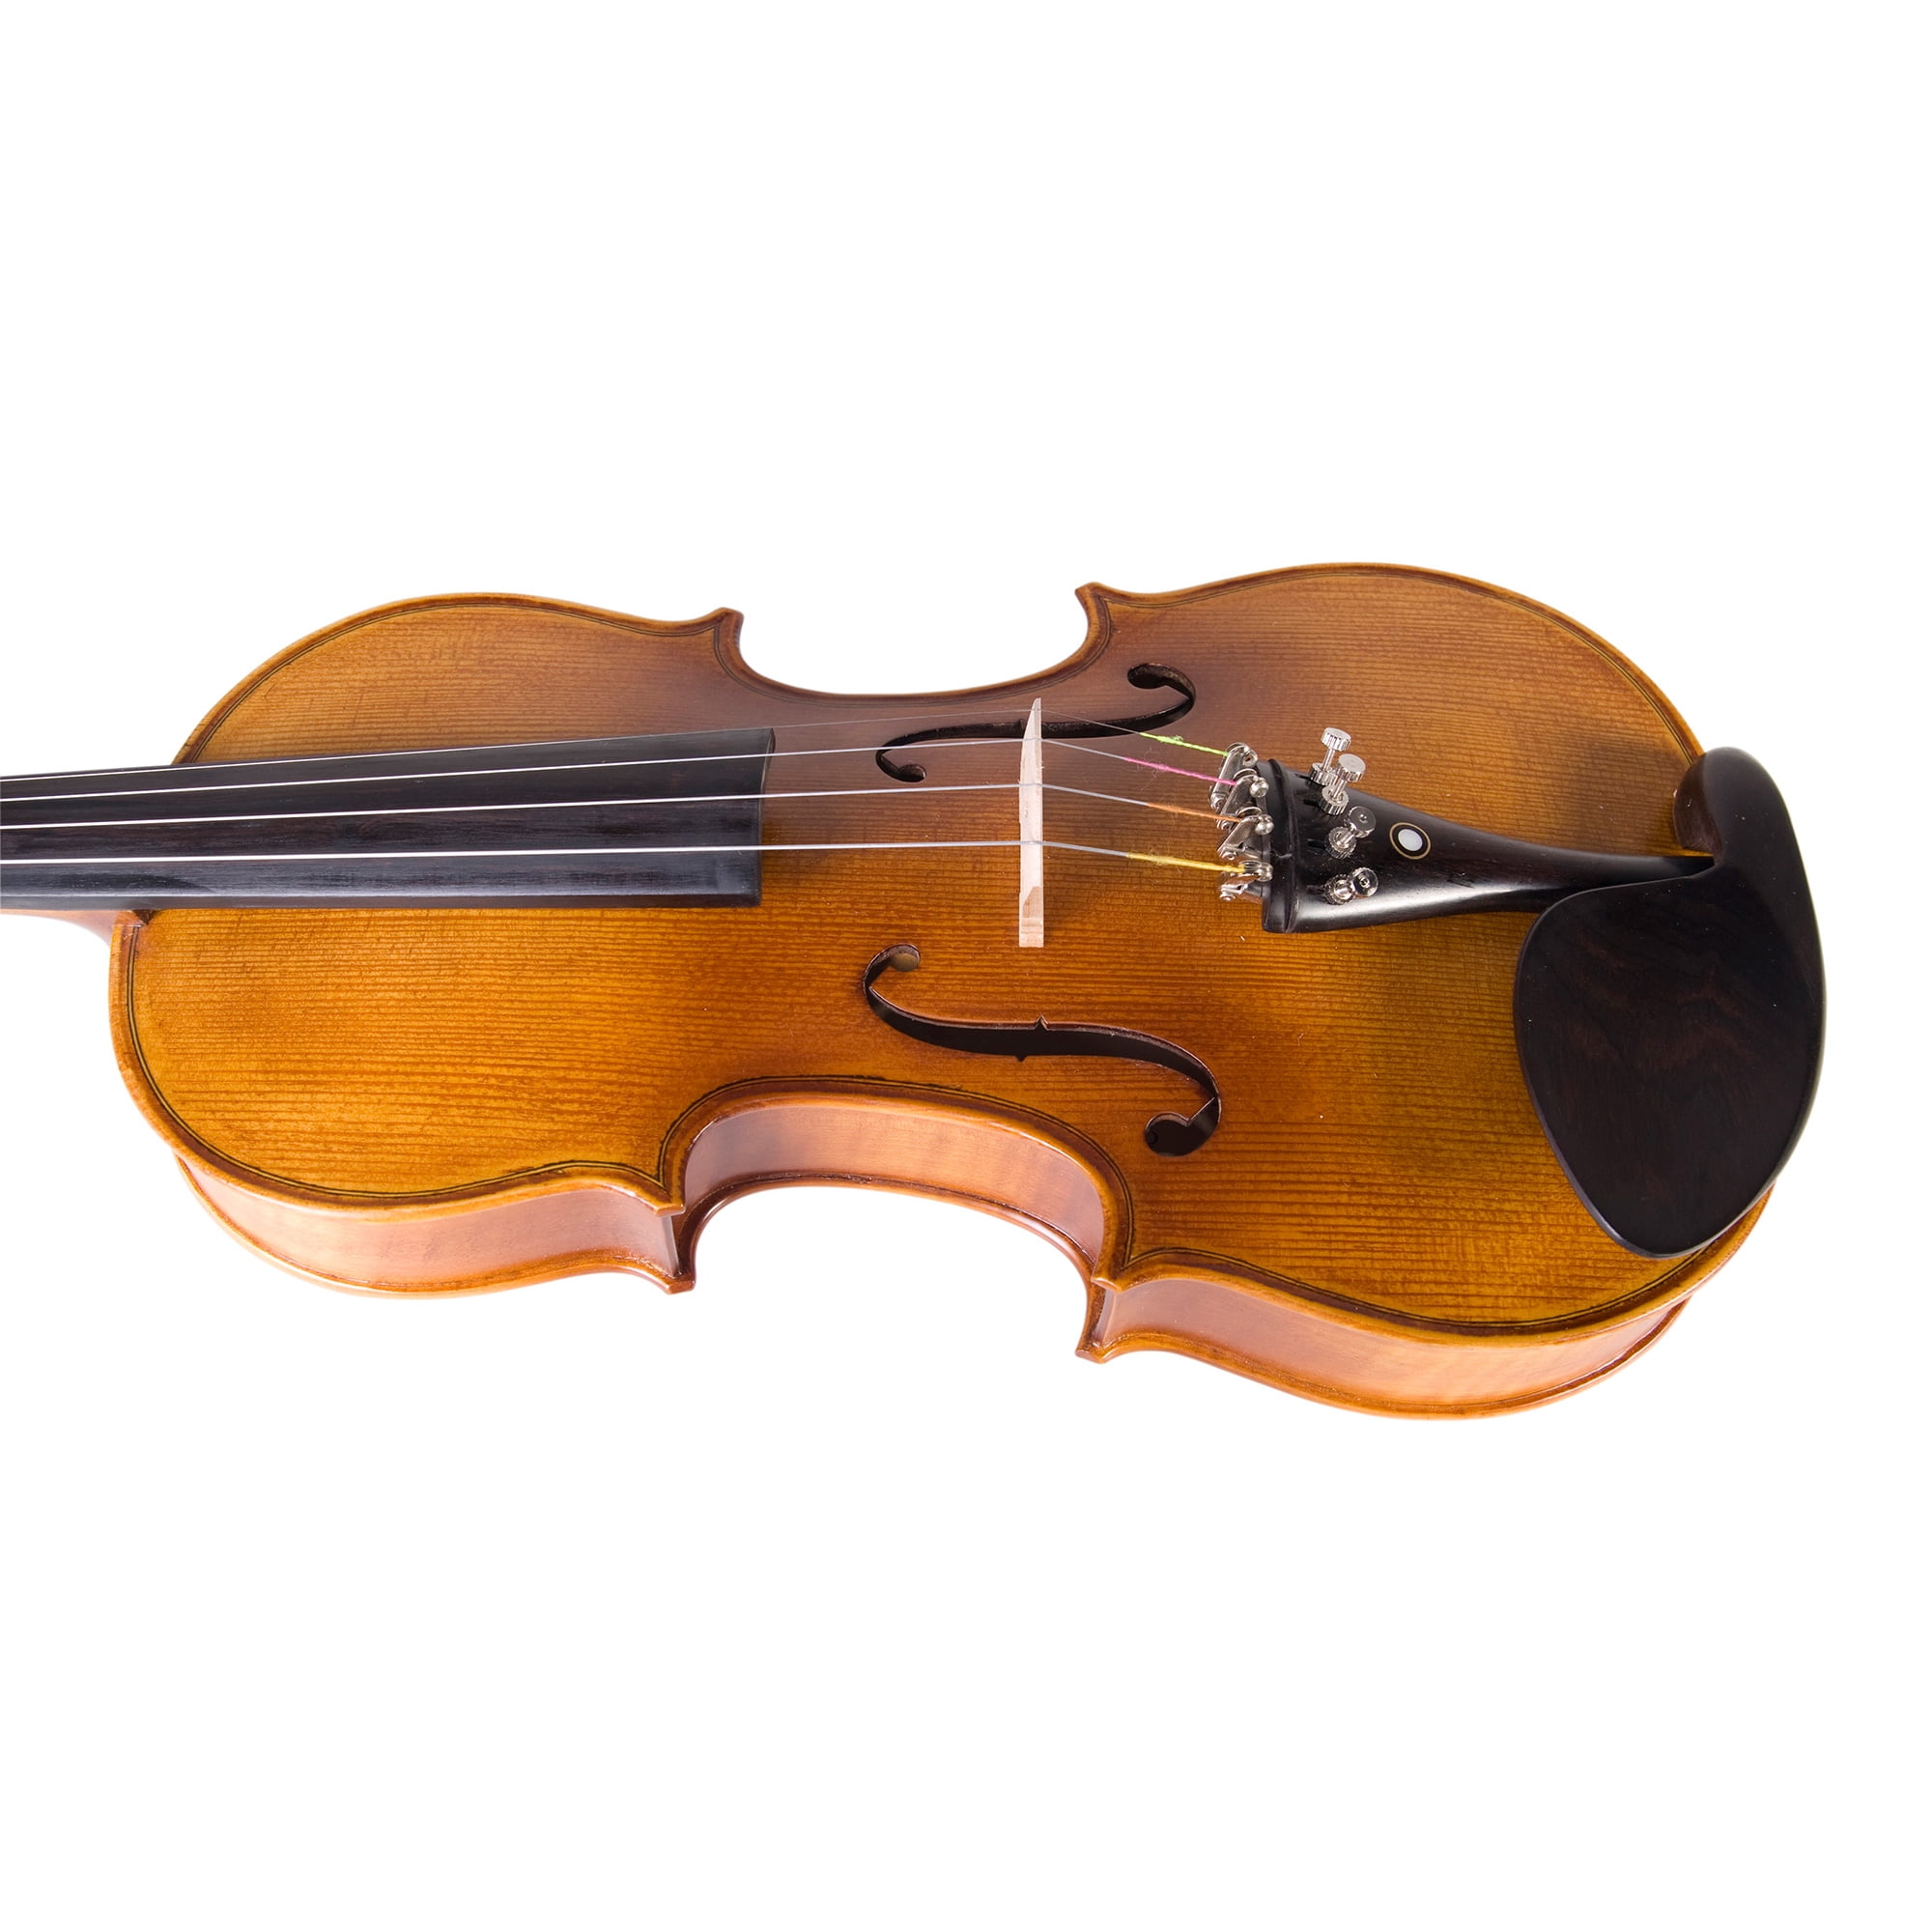 Cecilio CVN-500 Solidwood Ebony Fitted Violin with DAddario Prelude Strings Size 4/4 Full Size 